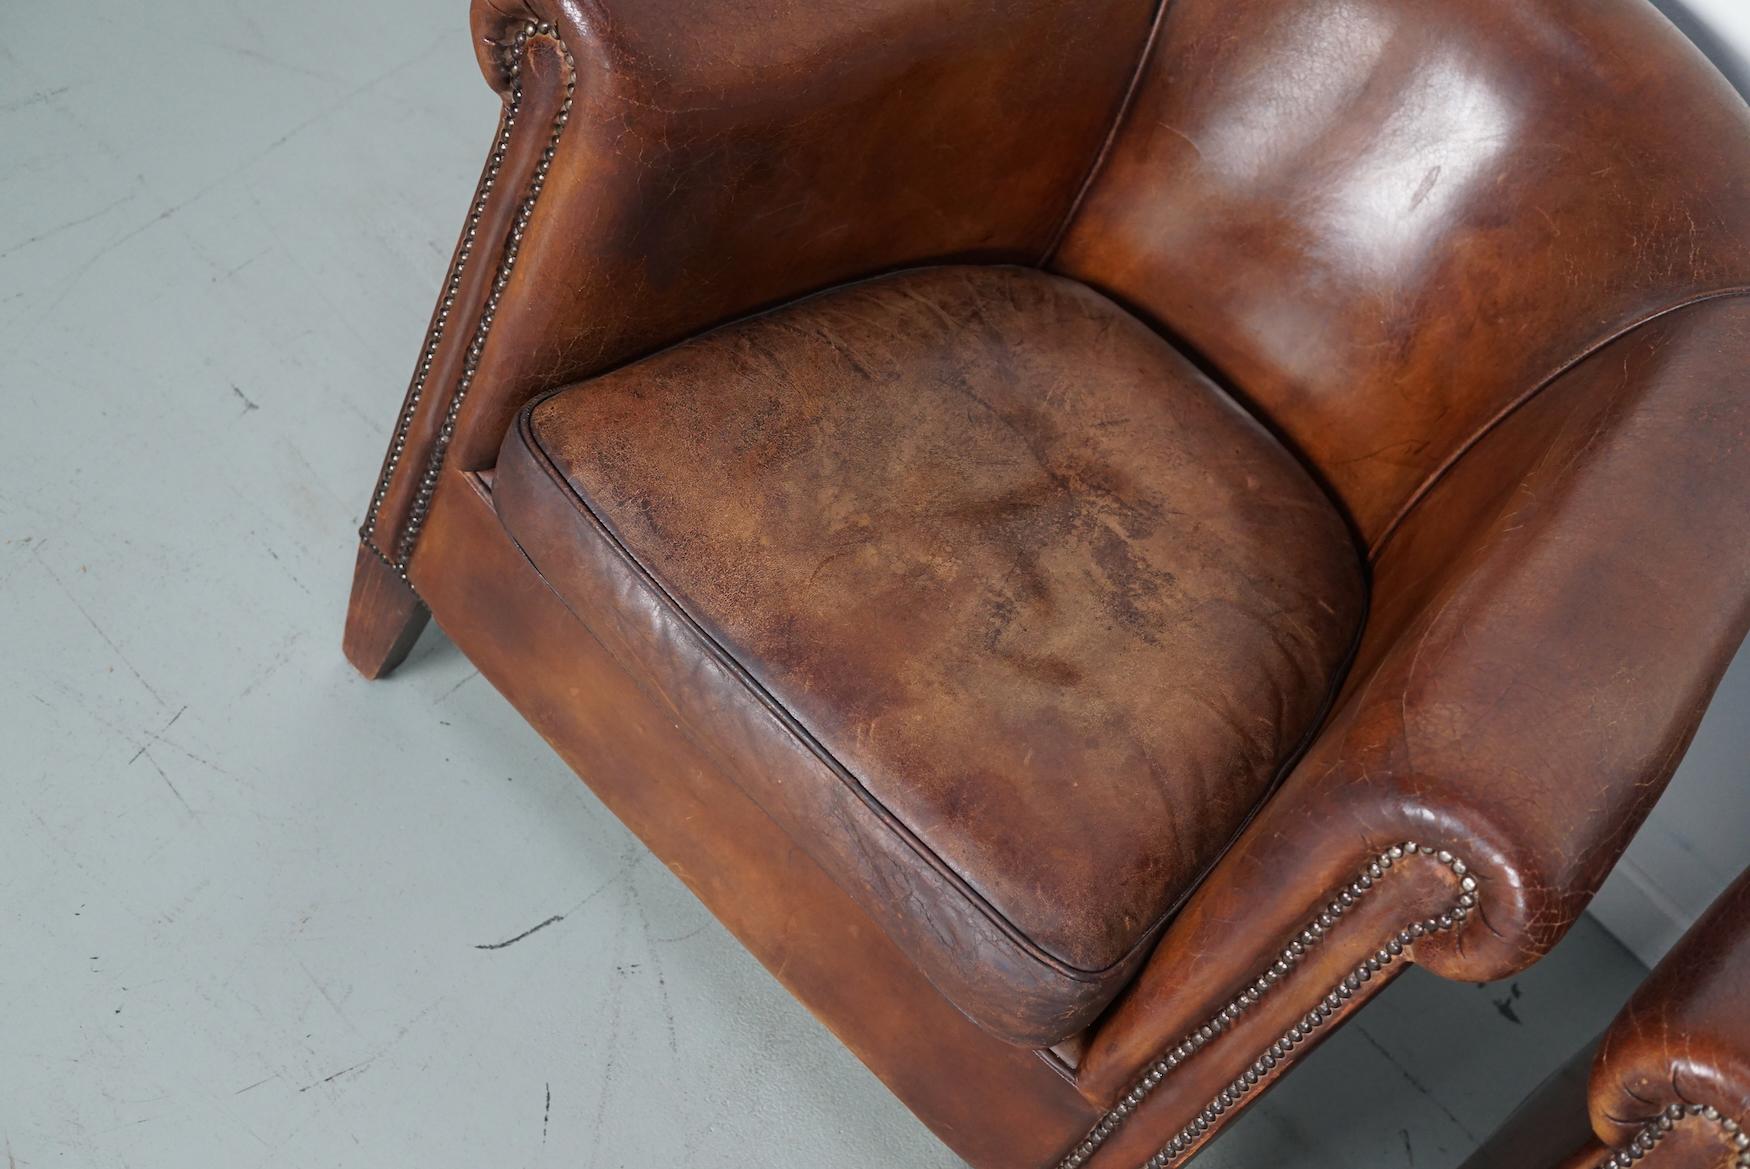 Vintage Dutch Cognac Colored Leather Club Chair, Set of 2 In Good Condition In Nijmegen, NL